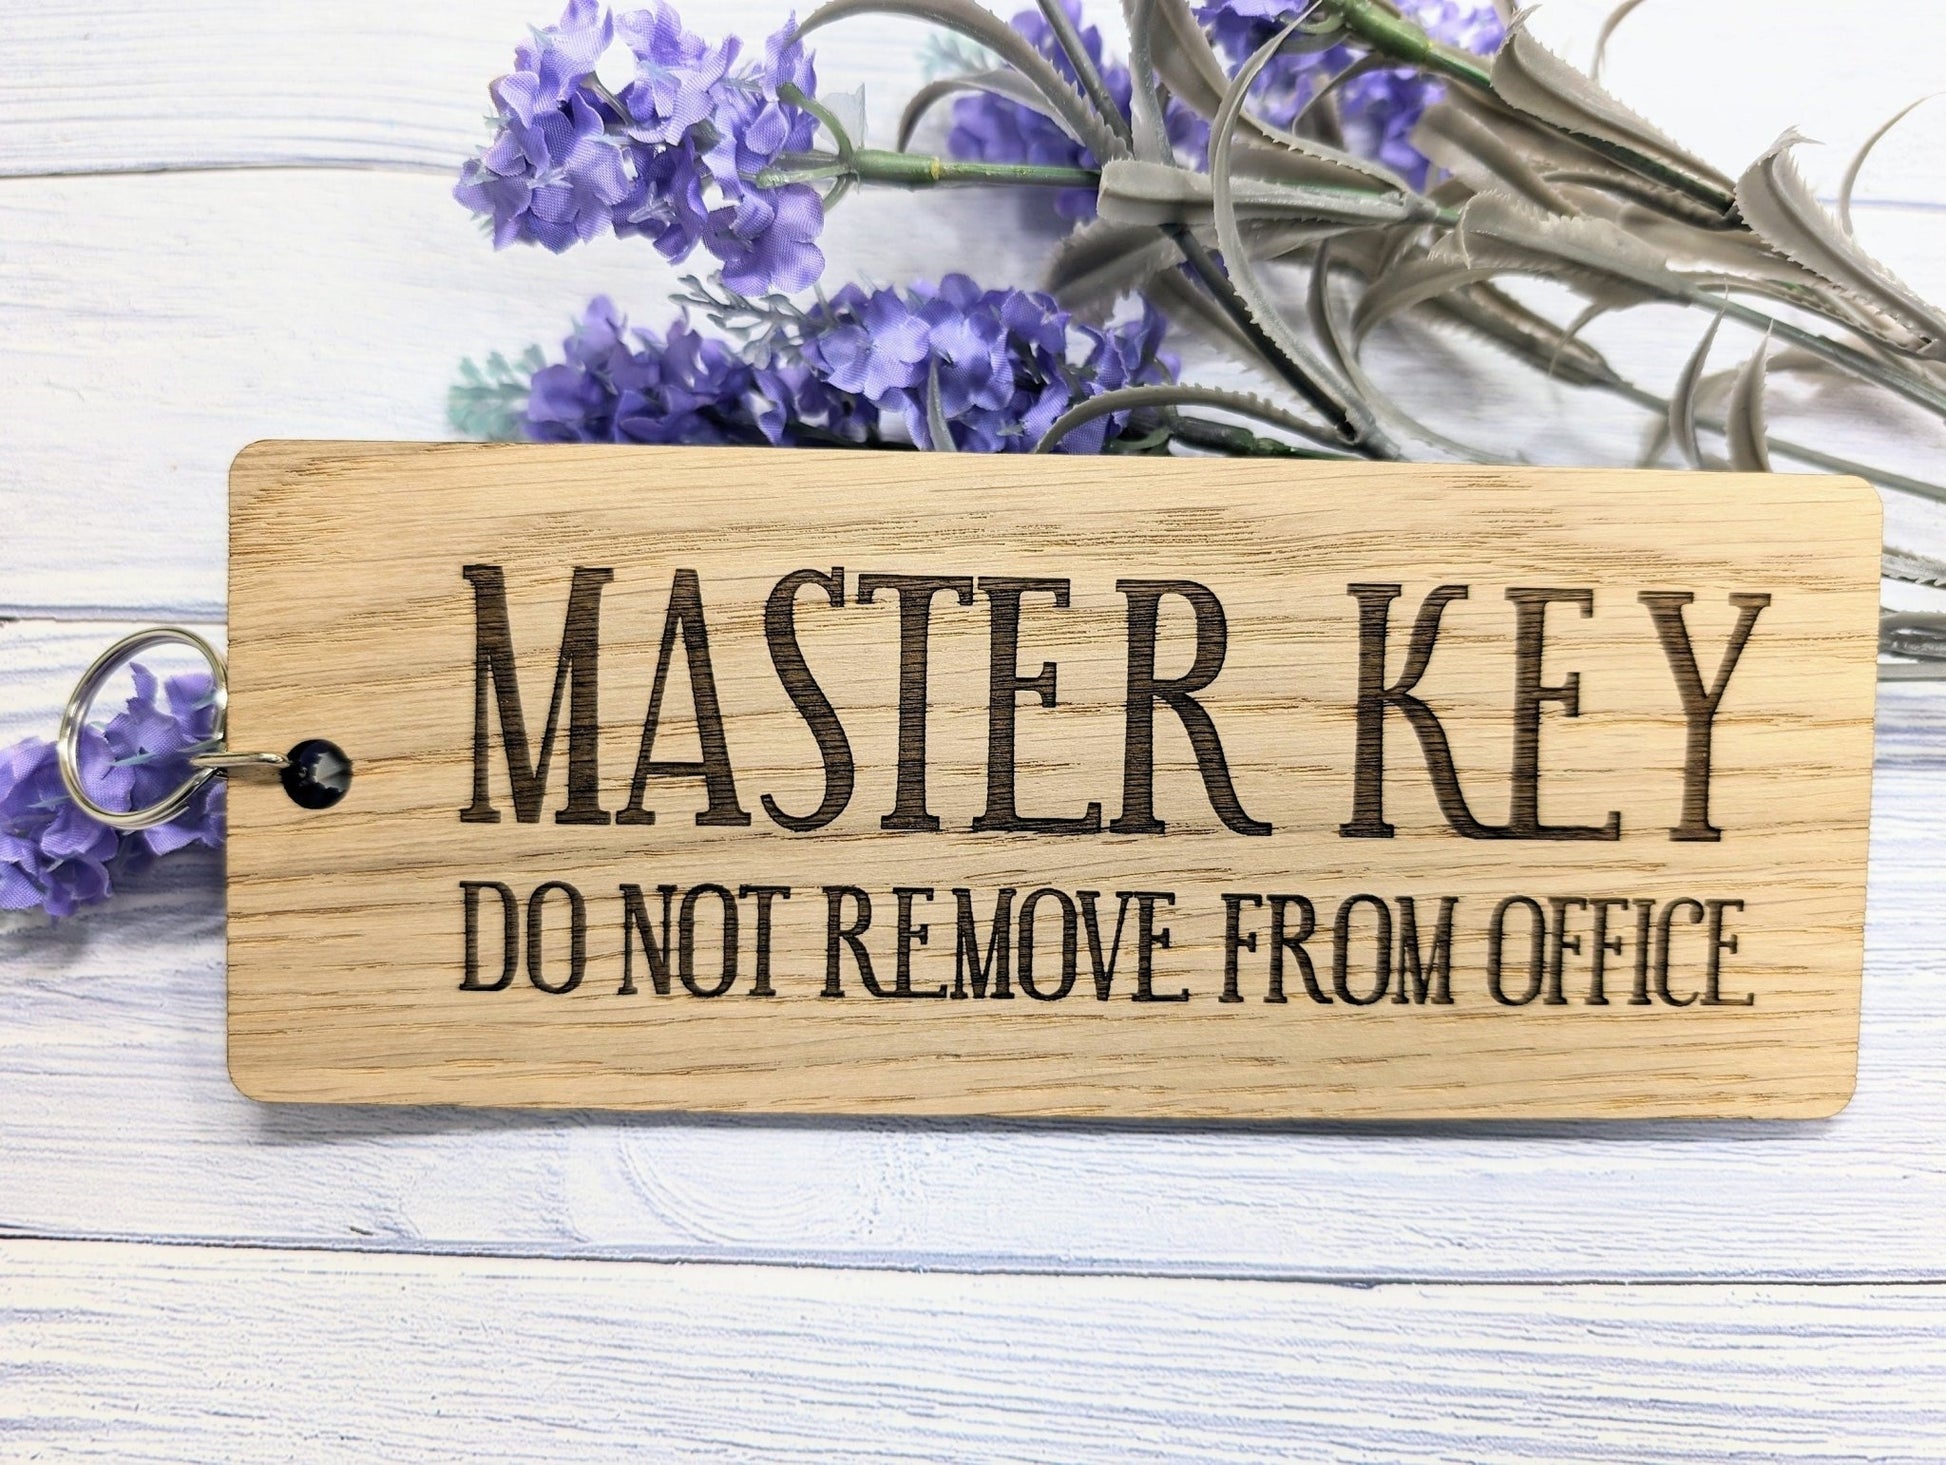 Extra-Large Wooden Keyring 'Master Key - Do Not Remove From Office' - Ideal for Important Keys | Handcrafted in Wales, Eco-Friendly Oak - CherryGroveCraft